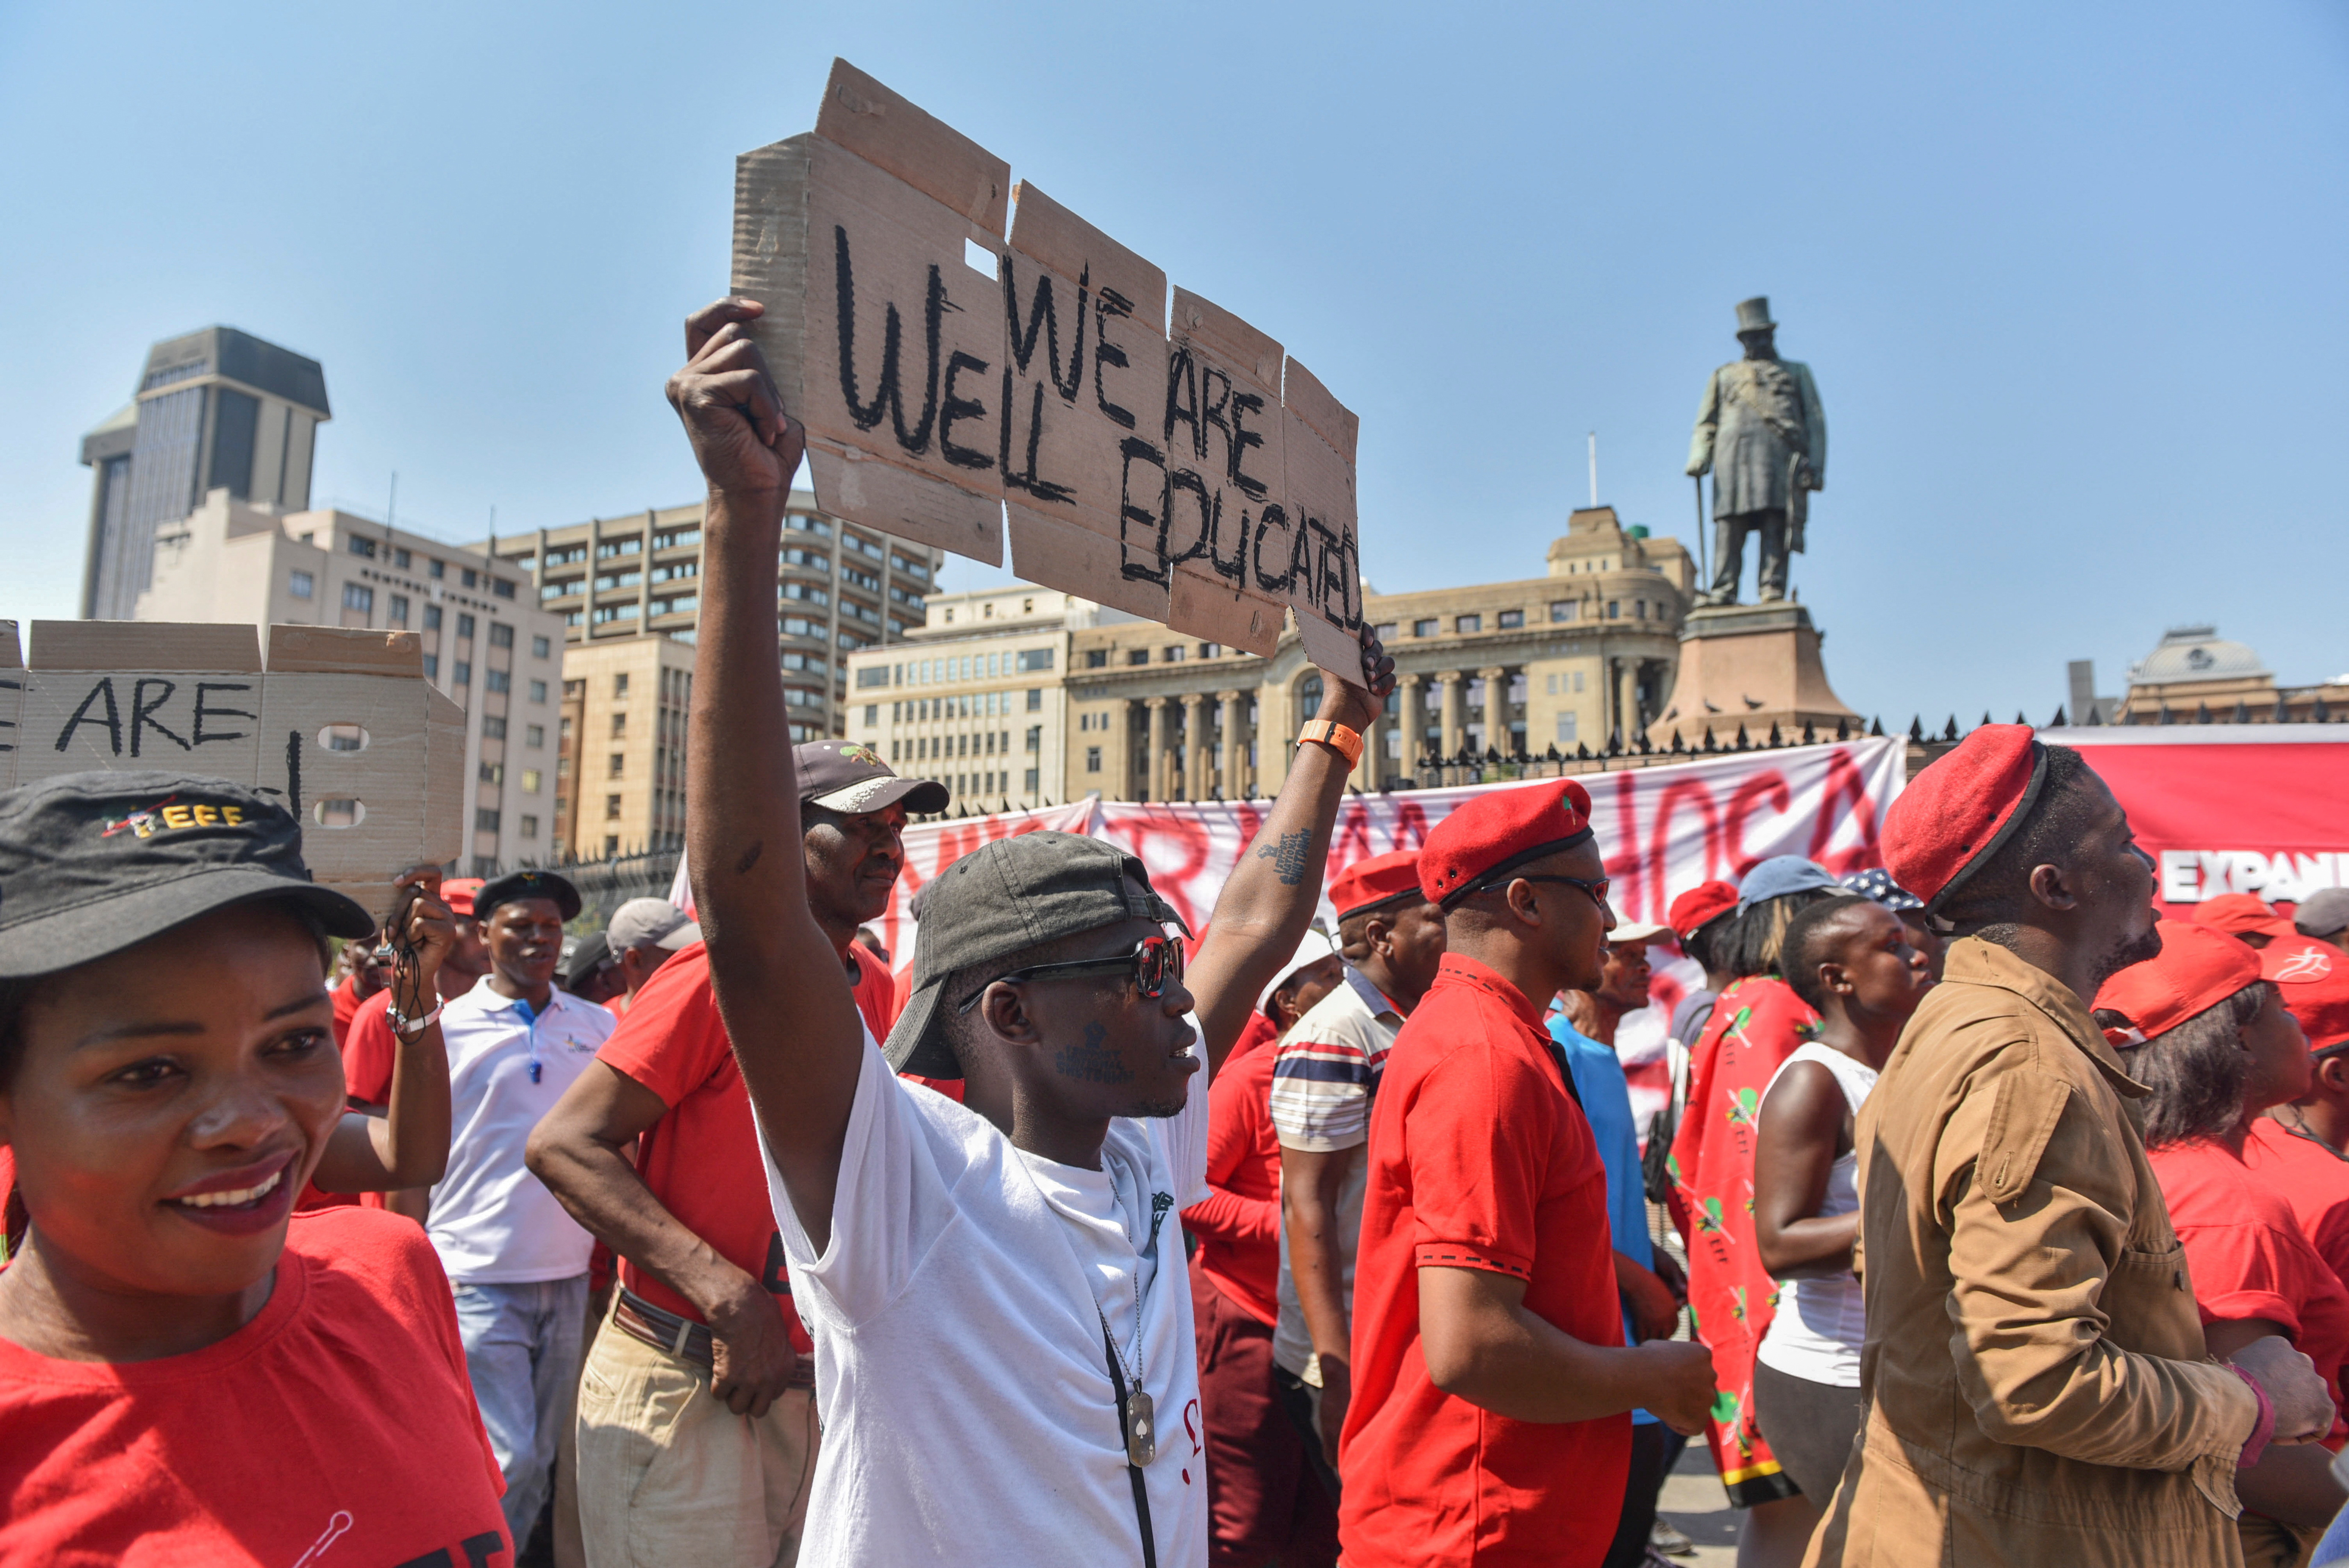 Members of Economic Freedom Fighters call for "National Shutdown" and resignation of President Ramaphosa in Pretoria